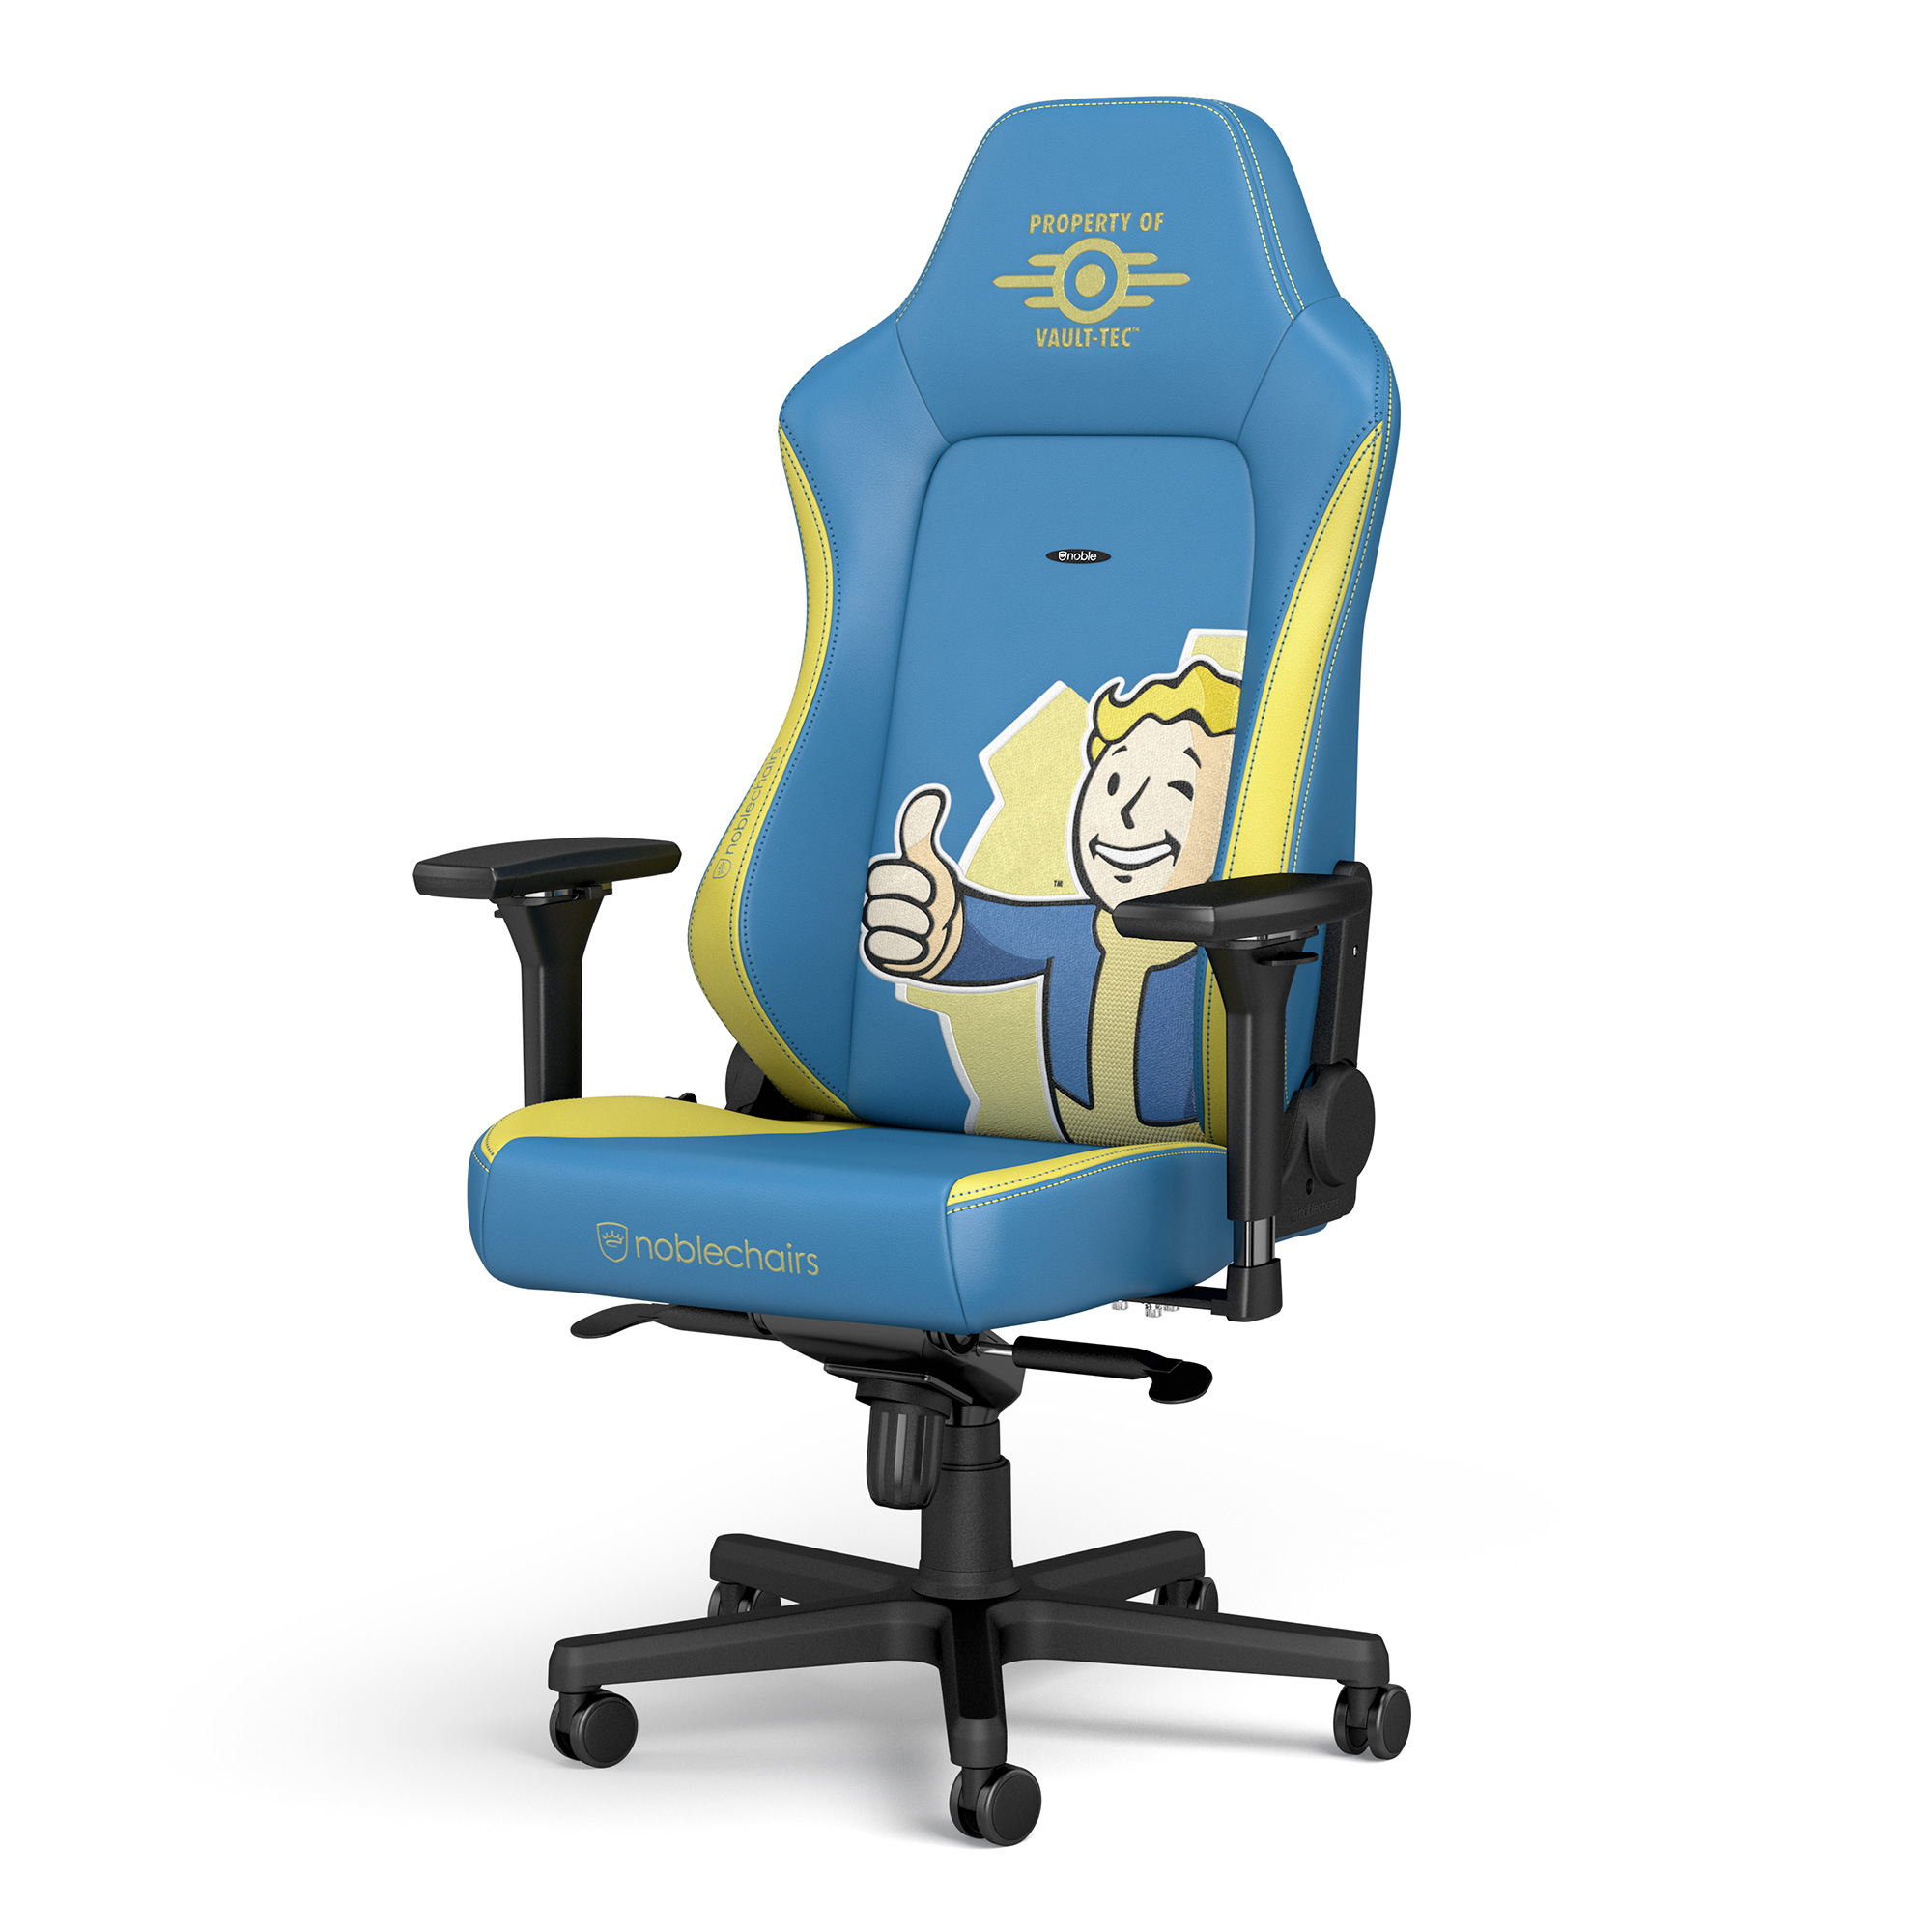  - noblechairs HERO Gaming Chair - Fallout Vault-Tec Edition - Blue/Yellow